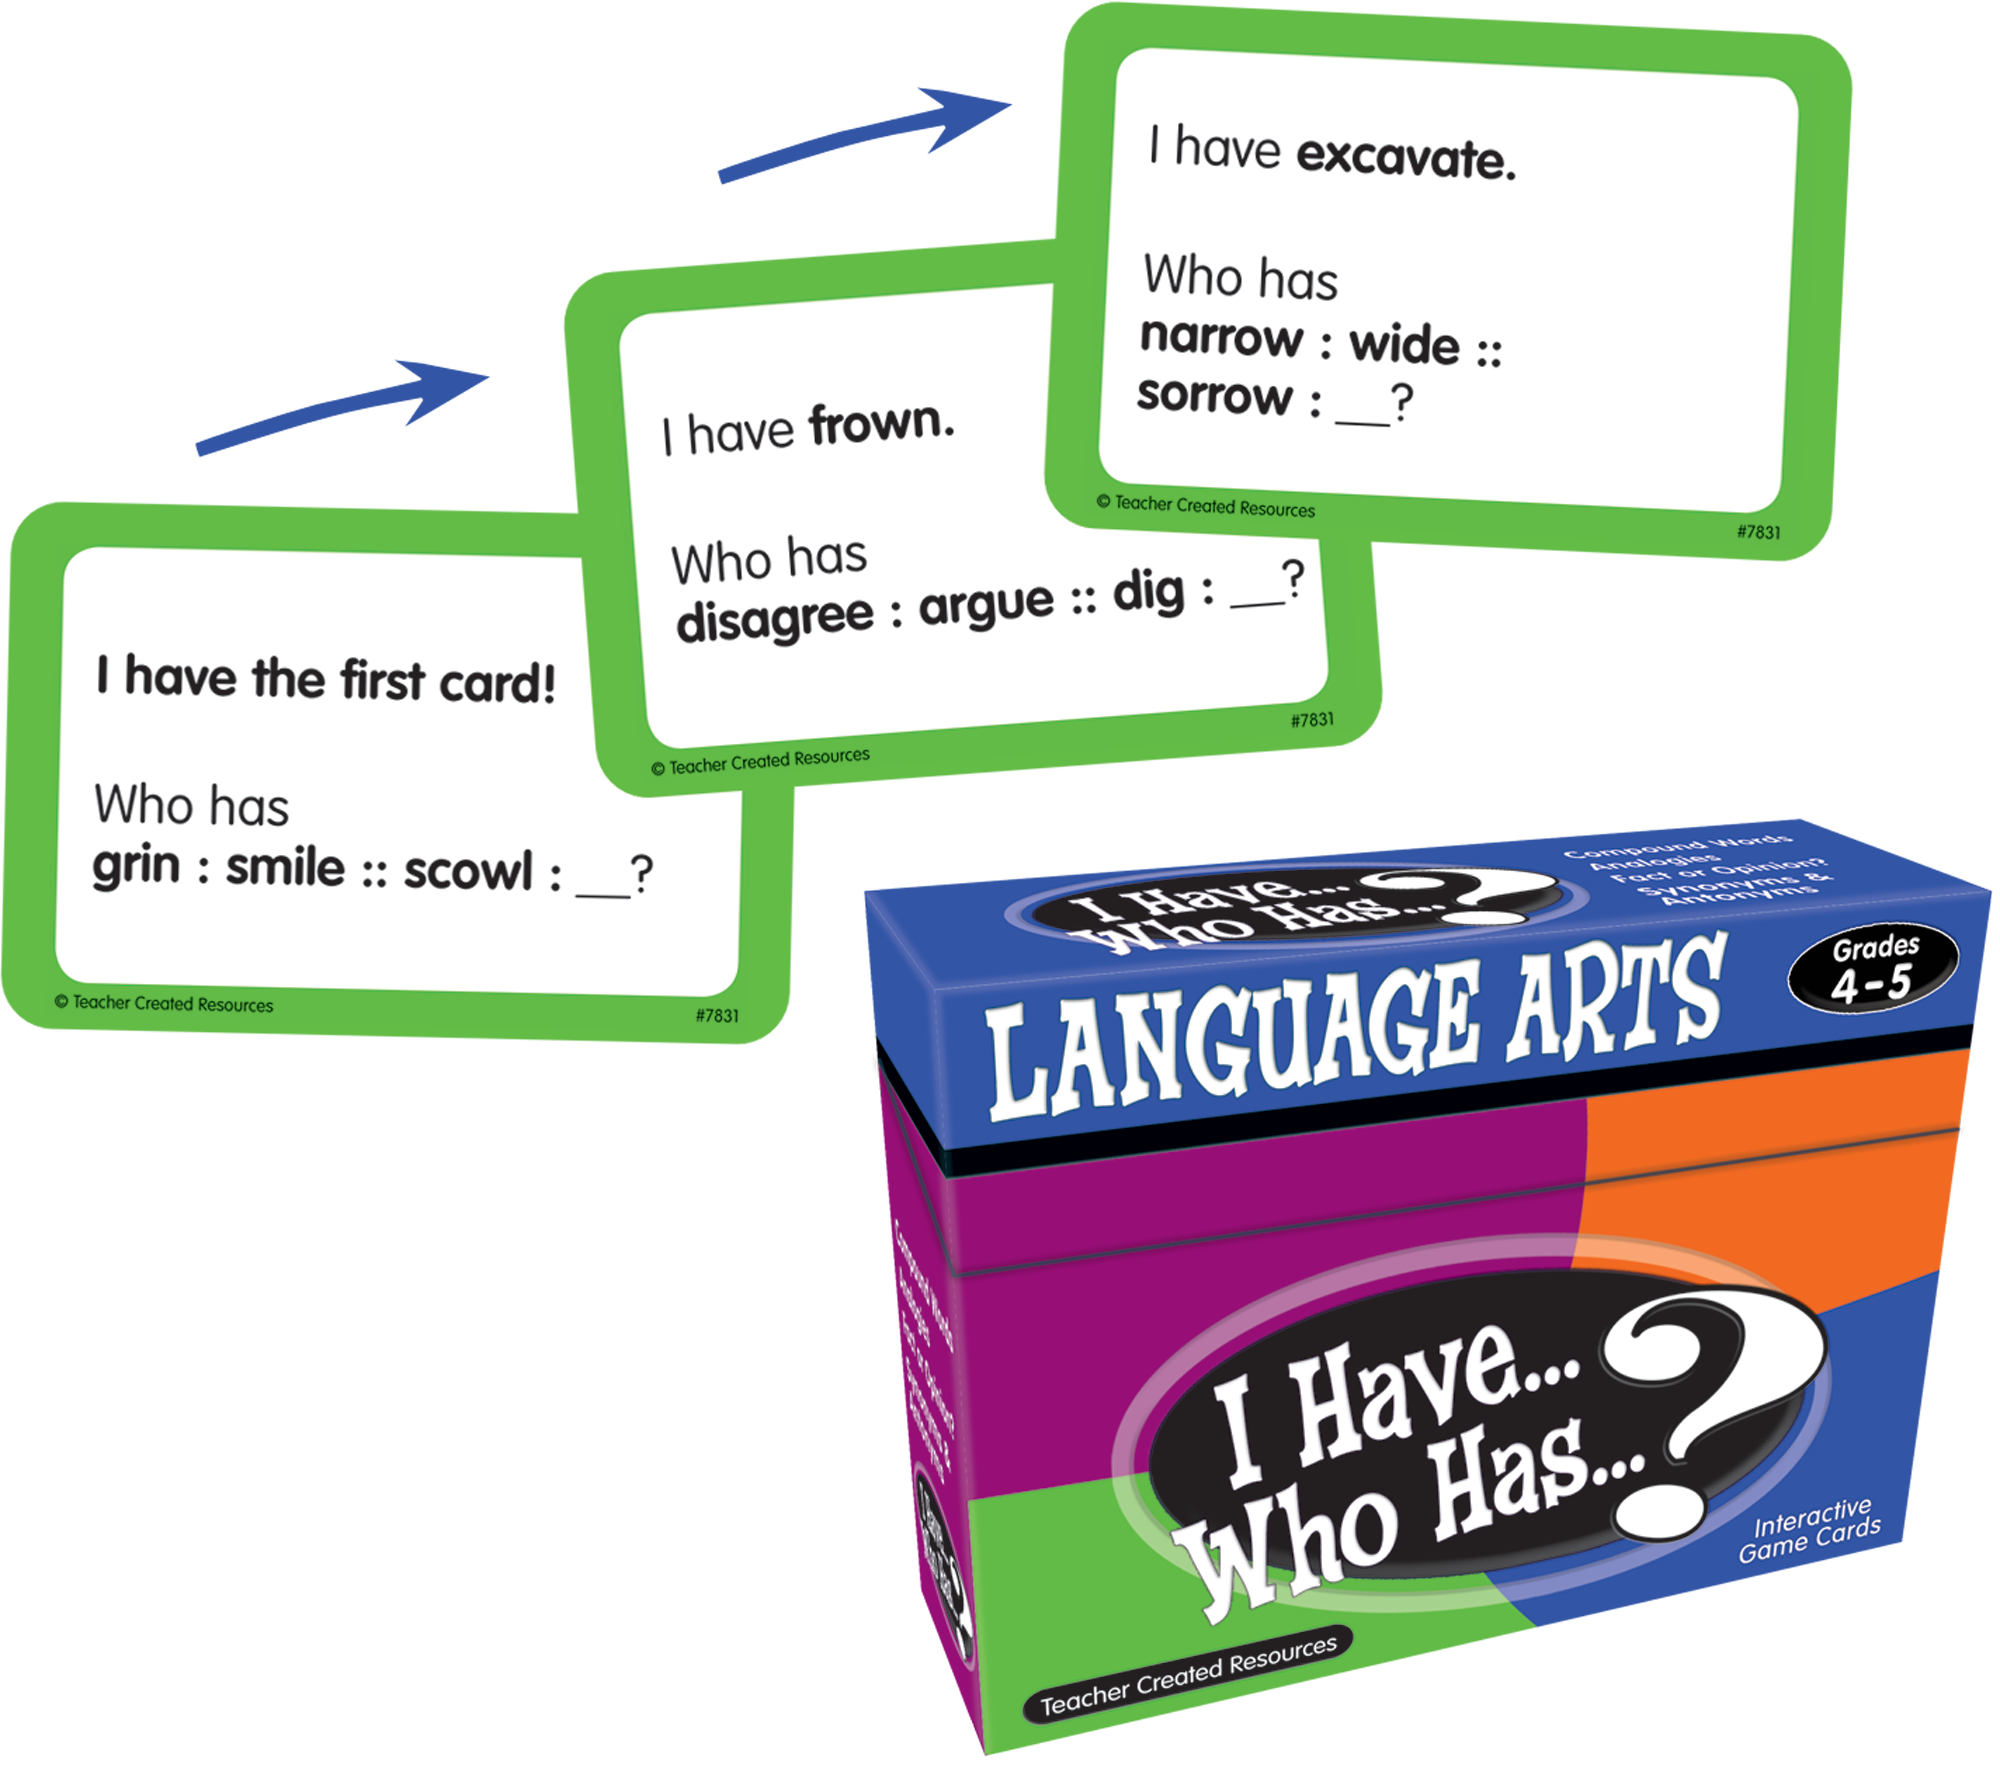 I Have... Who Has...? Language Arts Game (Gr. 4â€“5)